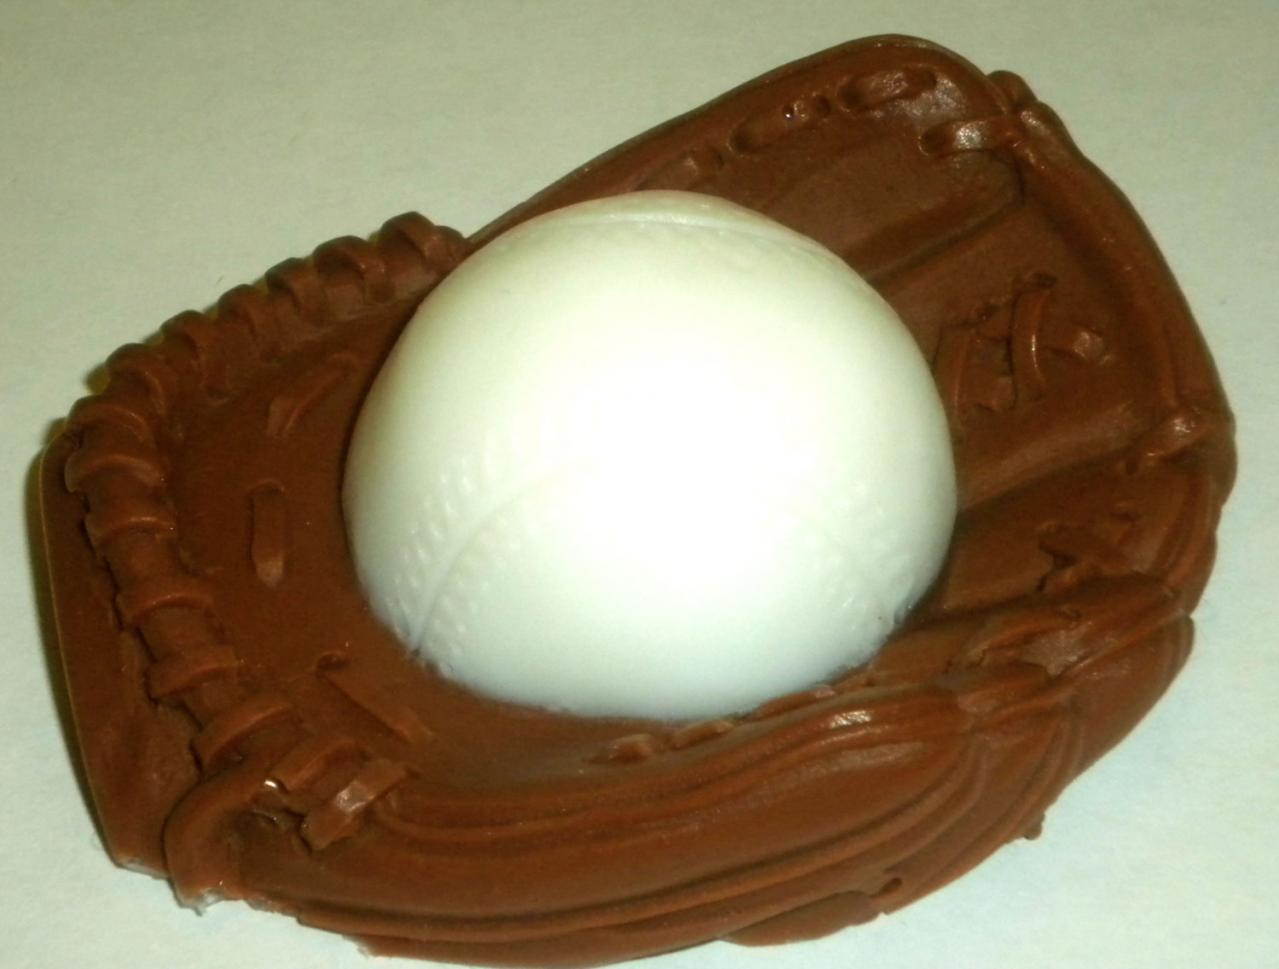 Soap - Baseball Glove And Ball - Baseball Mitt - Father's Day - Soap For Kids - Party Favors - You Choose Colors And Scent